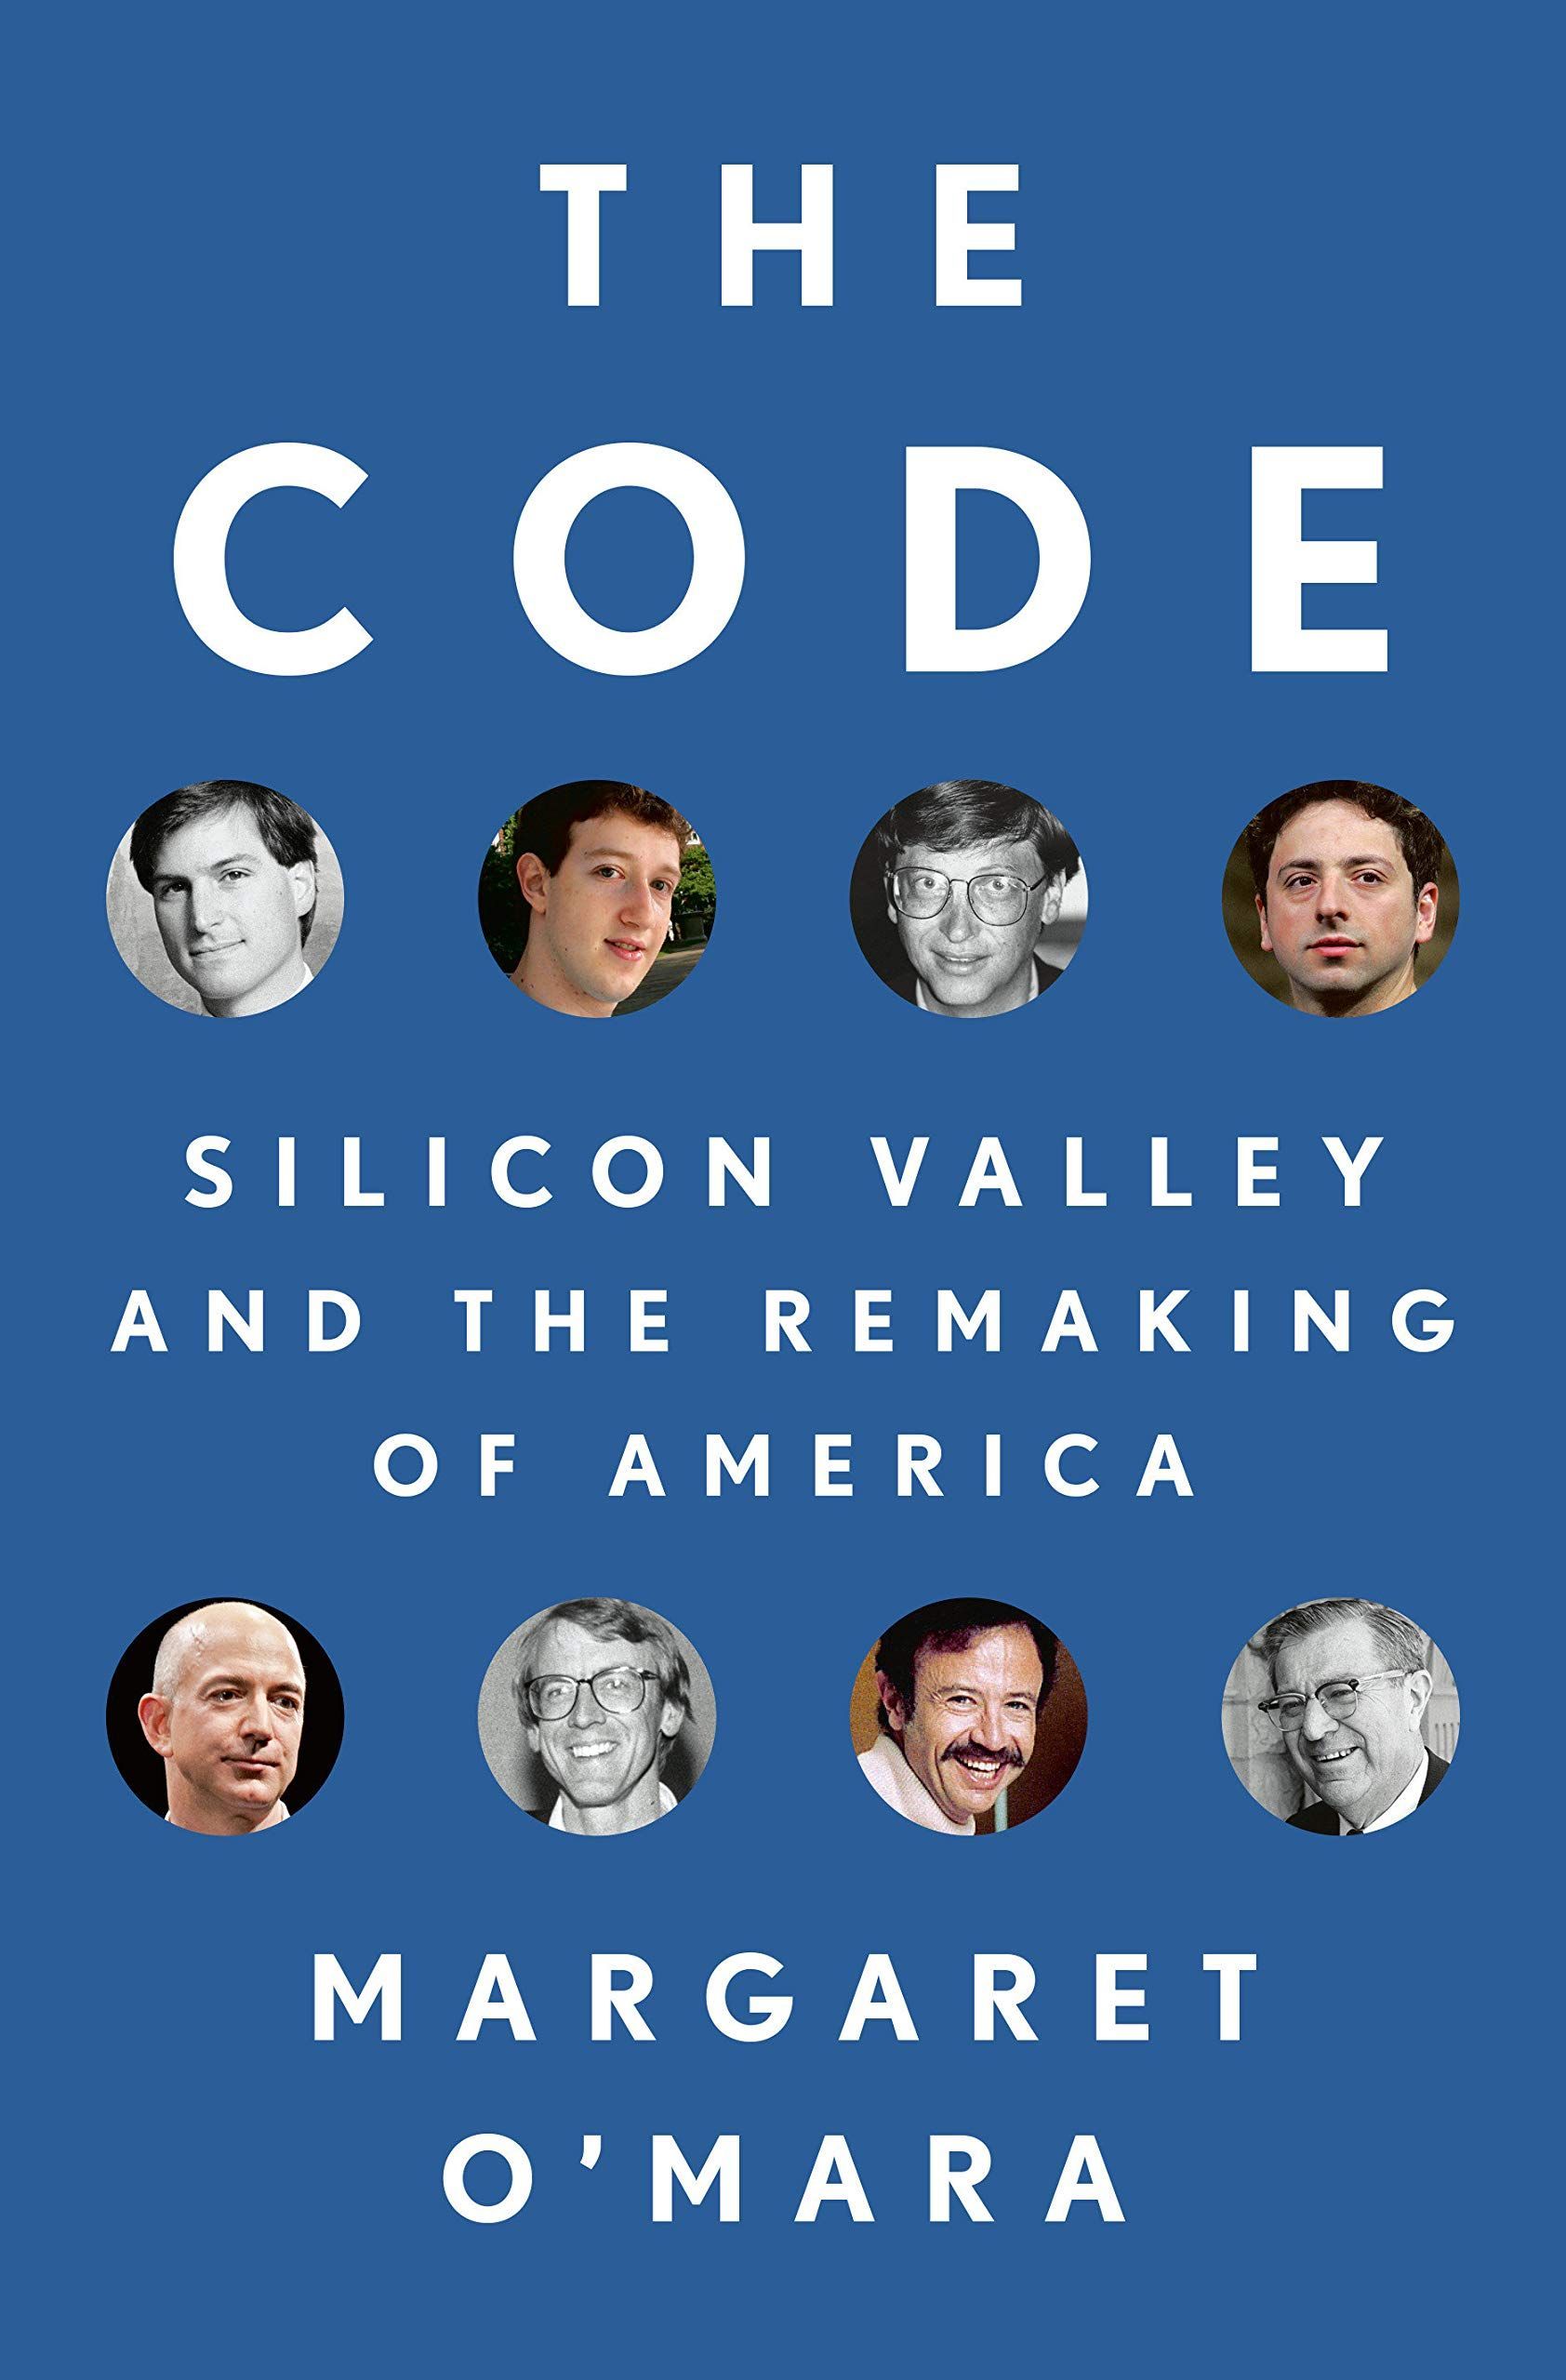 Silicon Valley: A Region High on Historical Amnesia